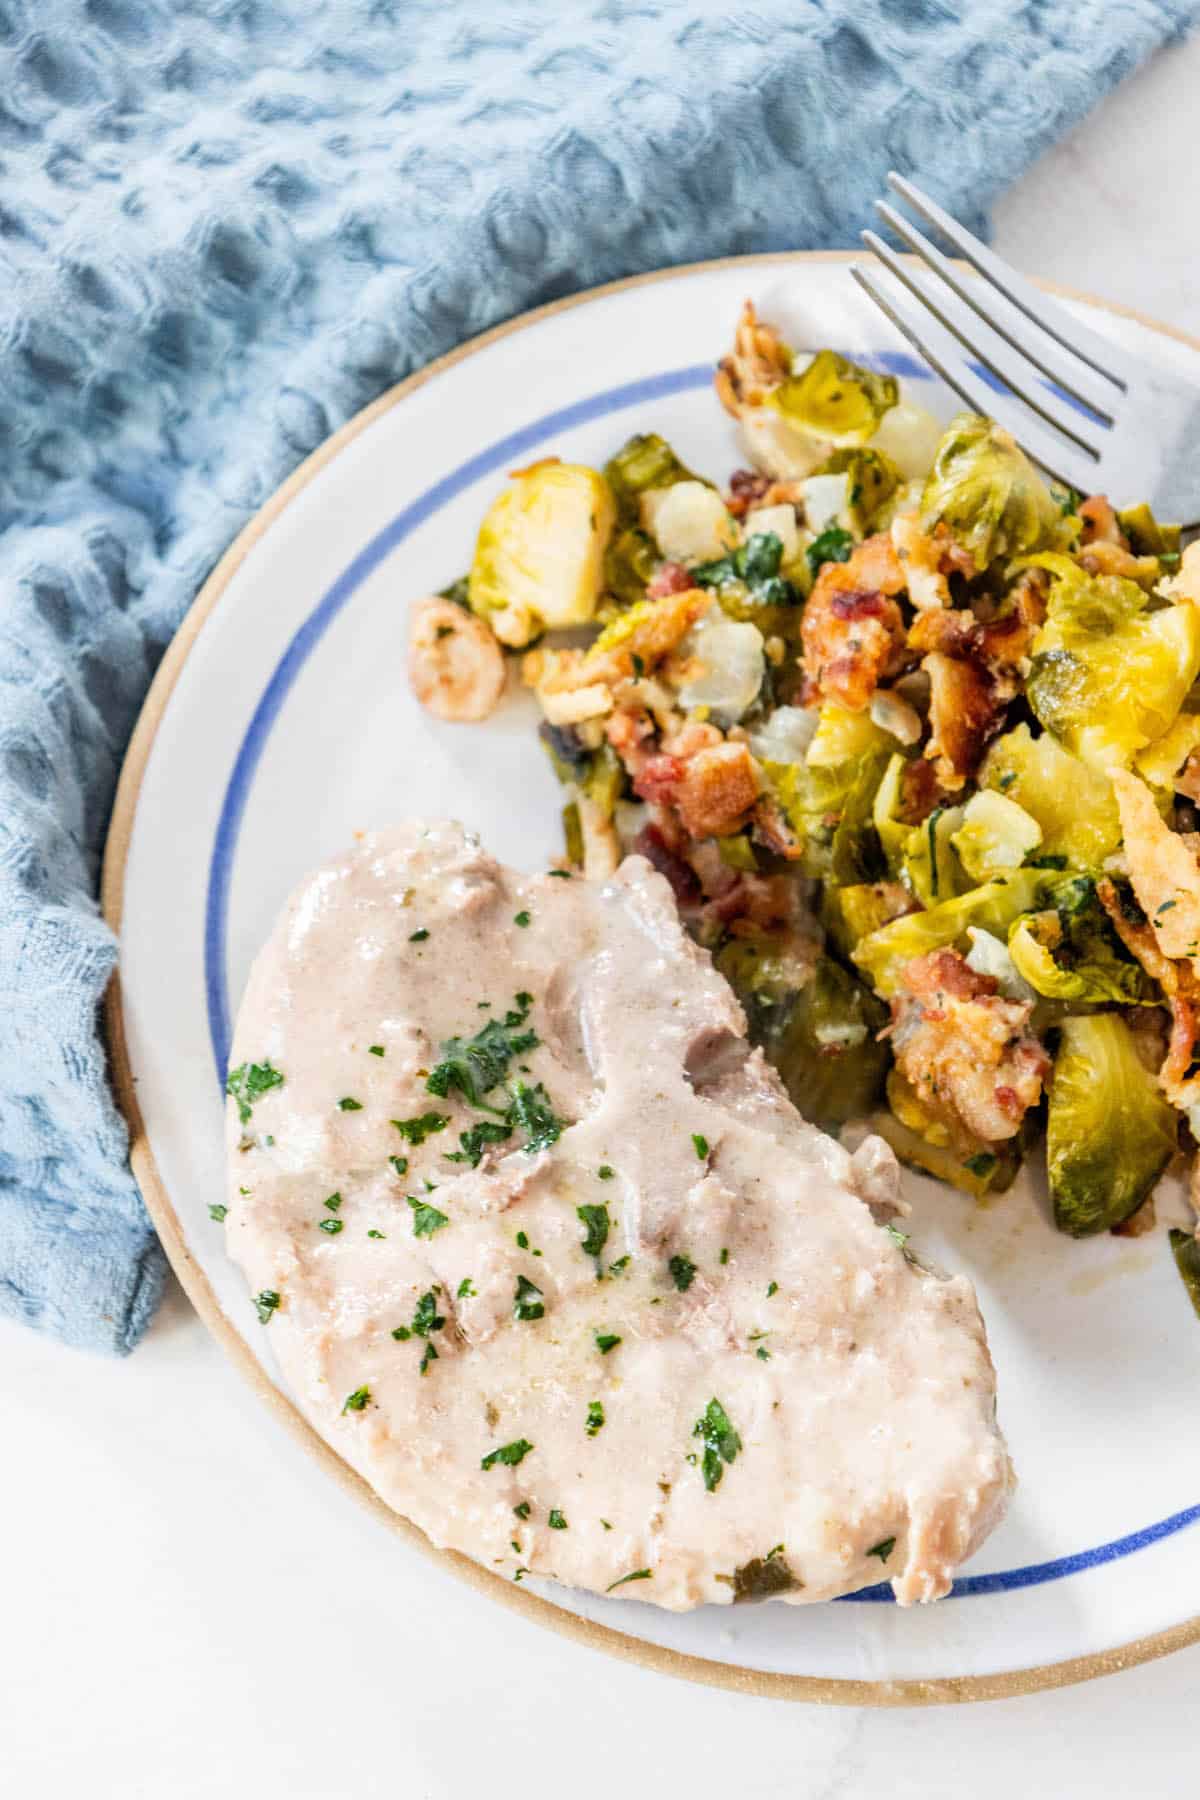 A creamy plate with chicken and brussels sprouts on it.